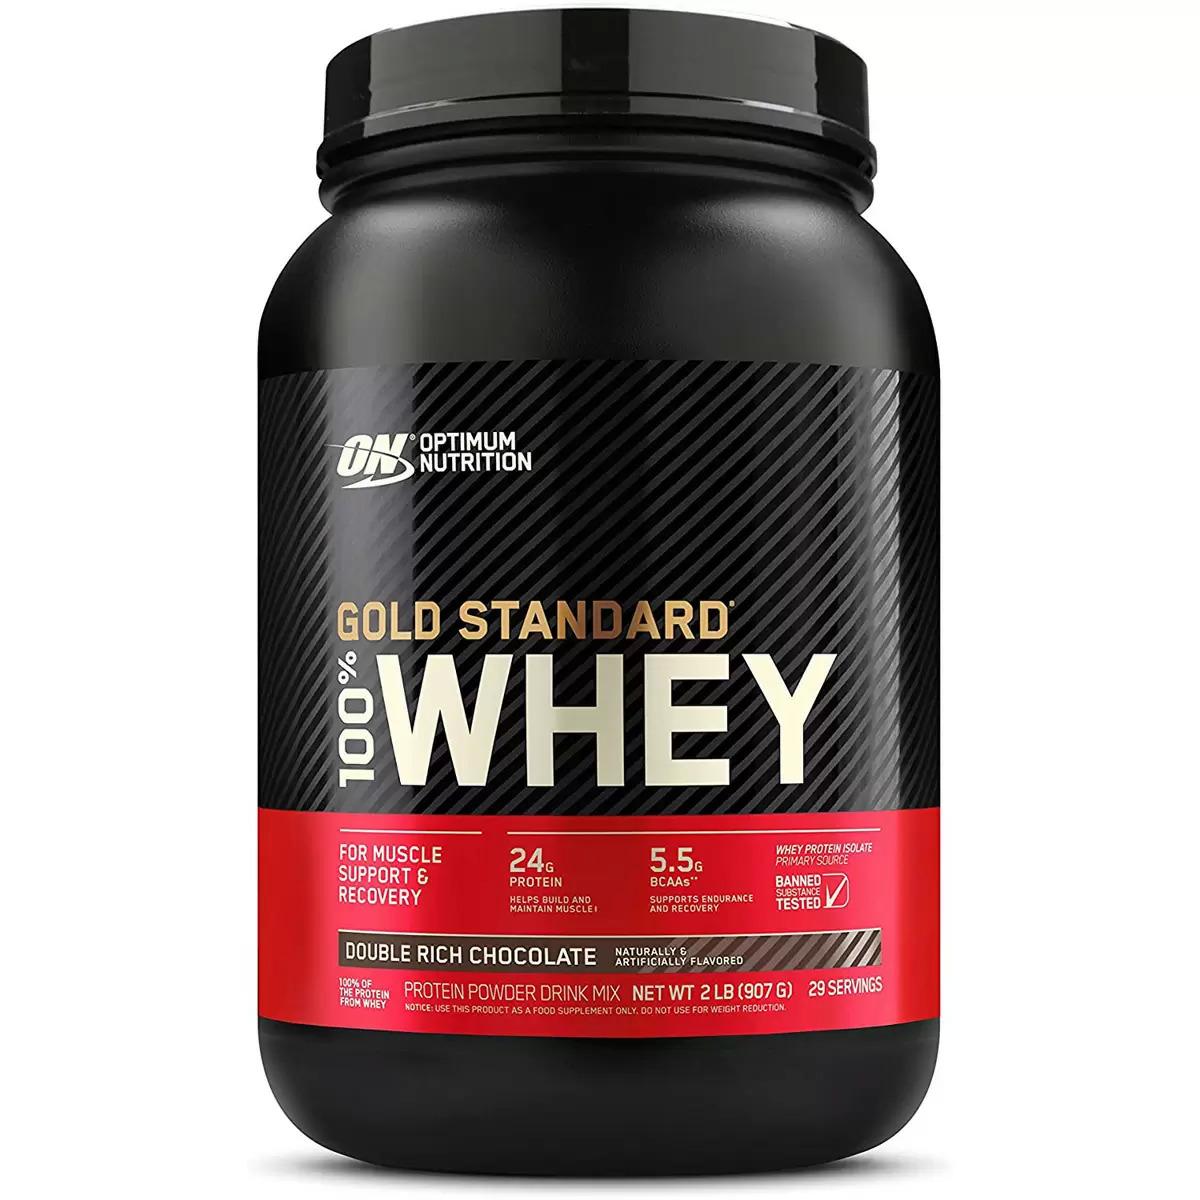 2lbs Optimum Nutrition Gold Whey Protein Powder for $21.37 Shipped